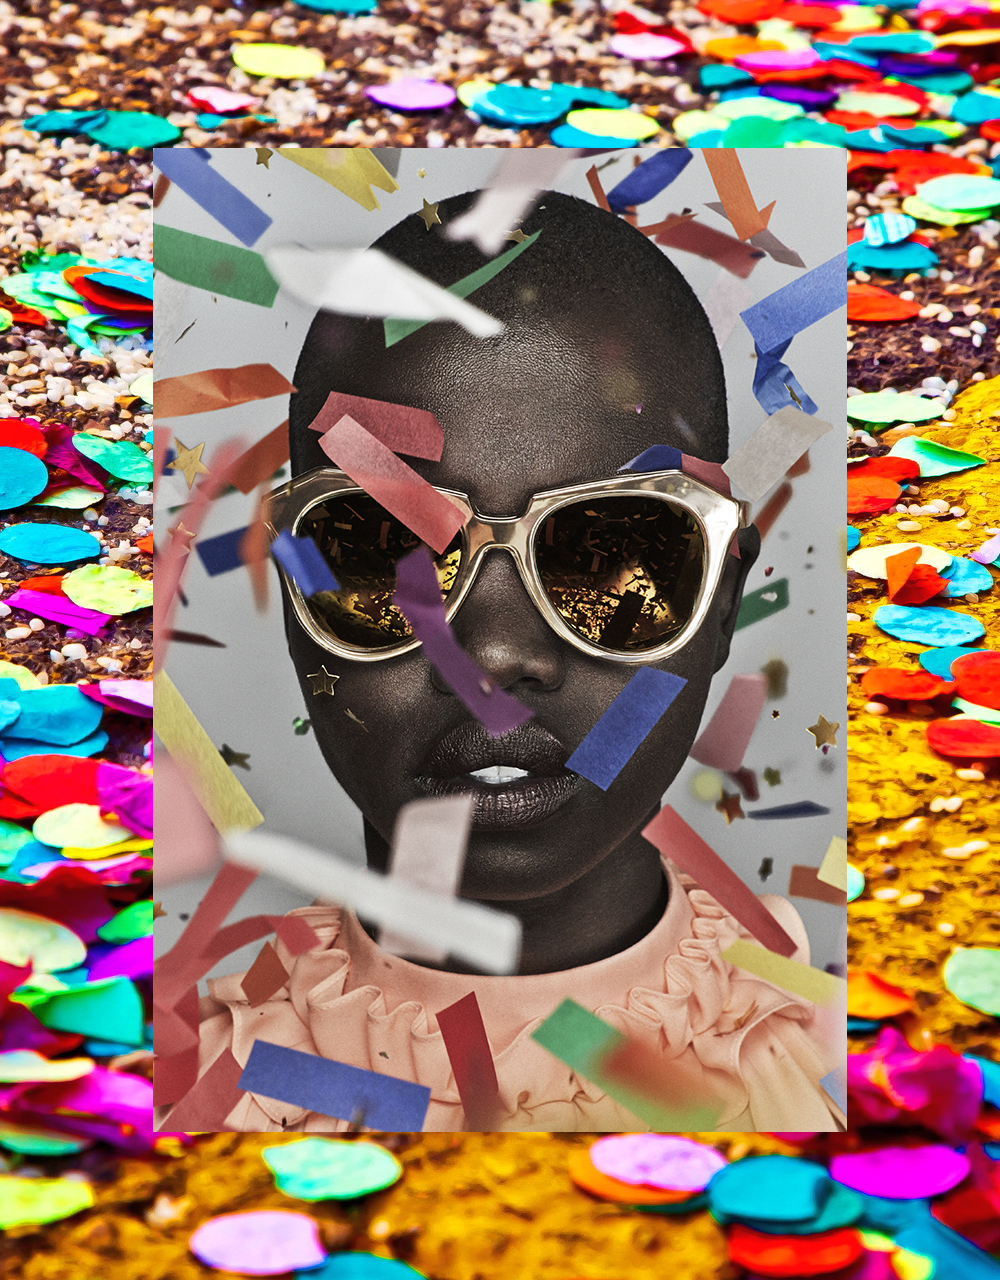 BYCHILL NEWS Karen Walker Eyewear Celebrates ten years with 10 years of making funny faces campaign